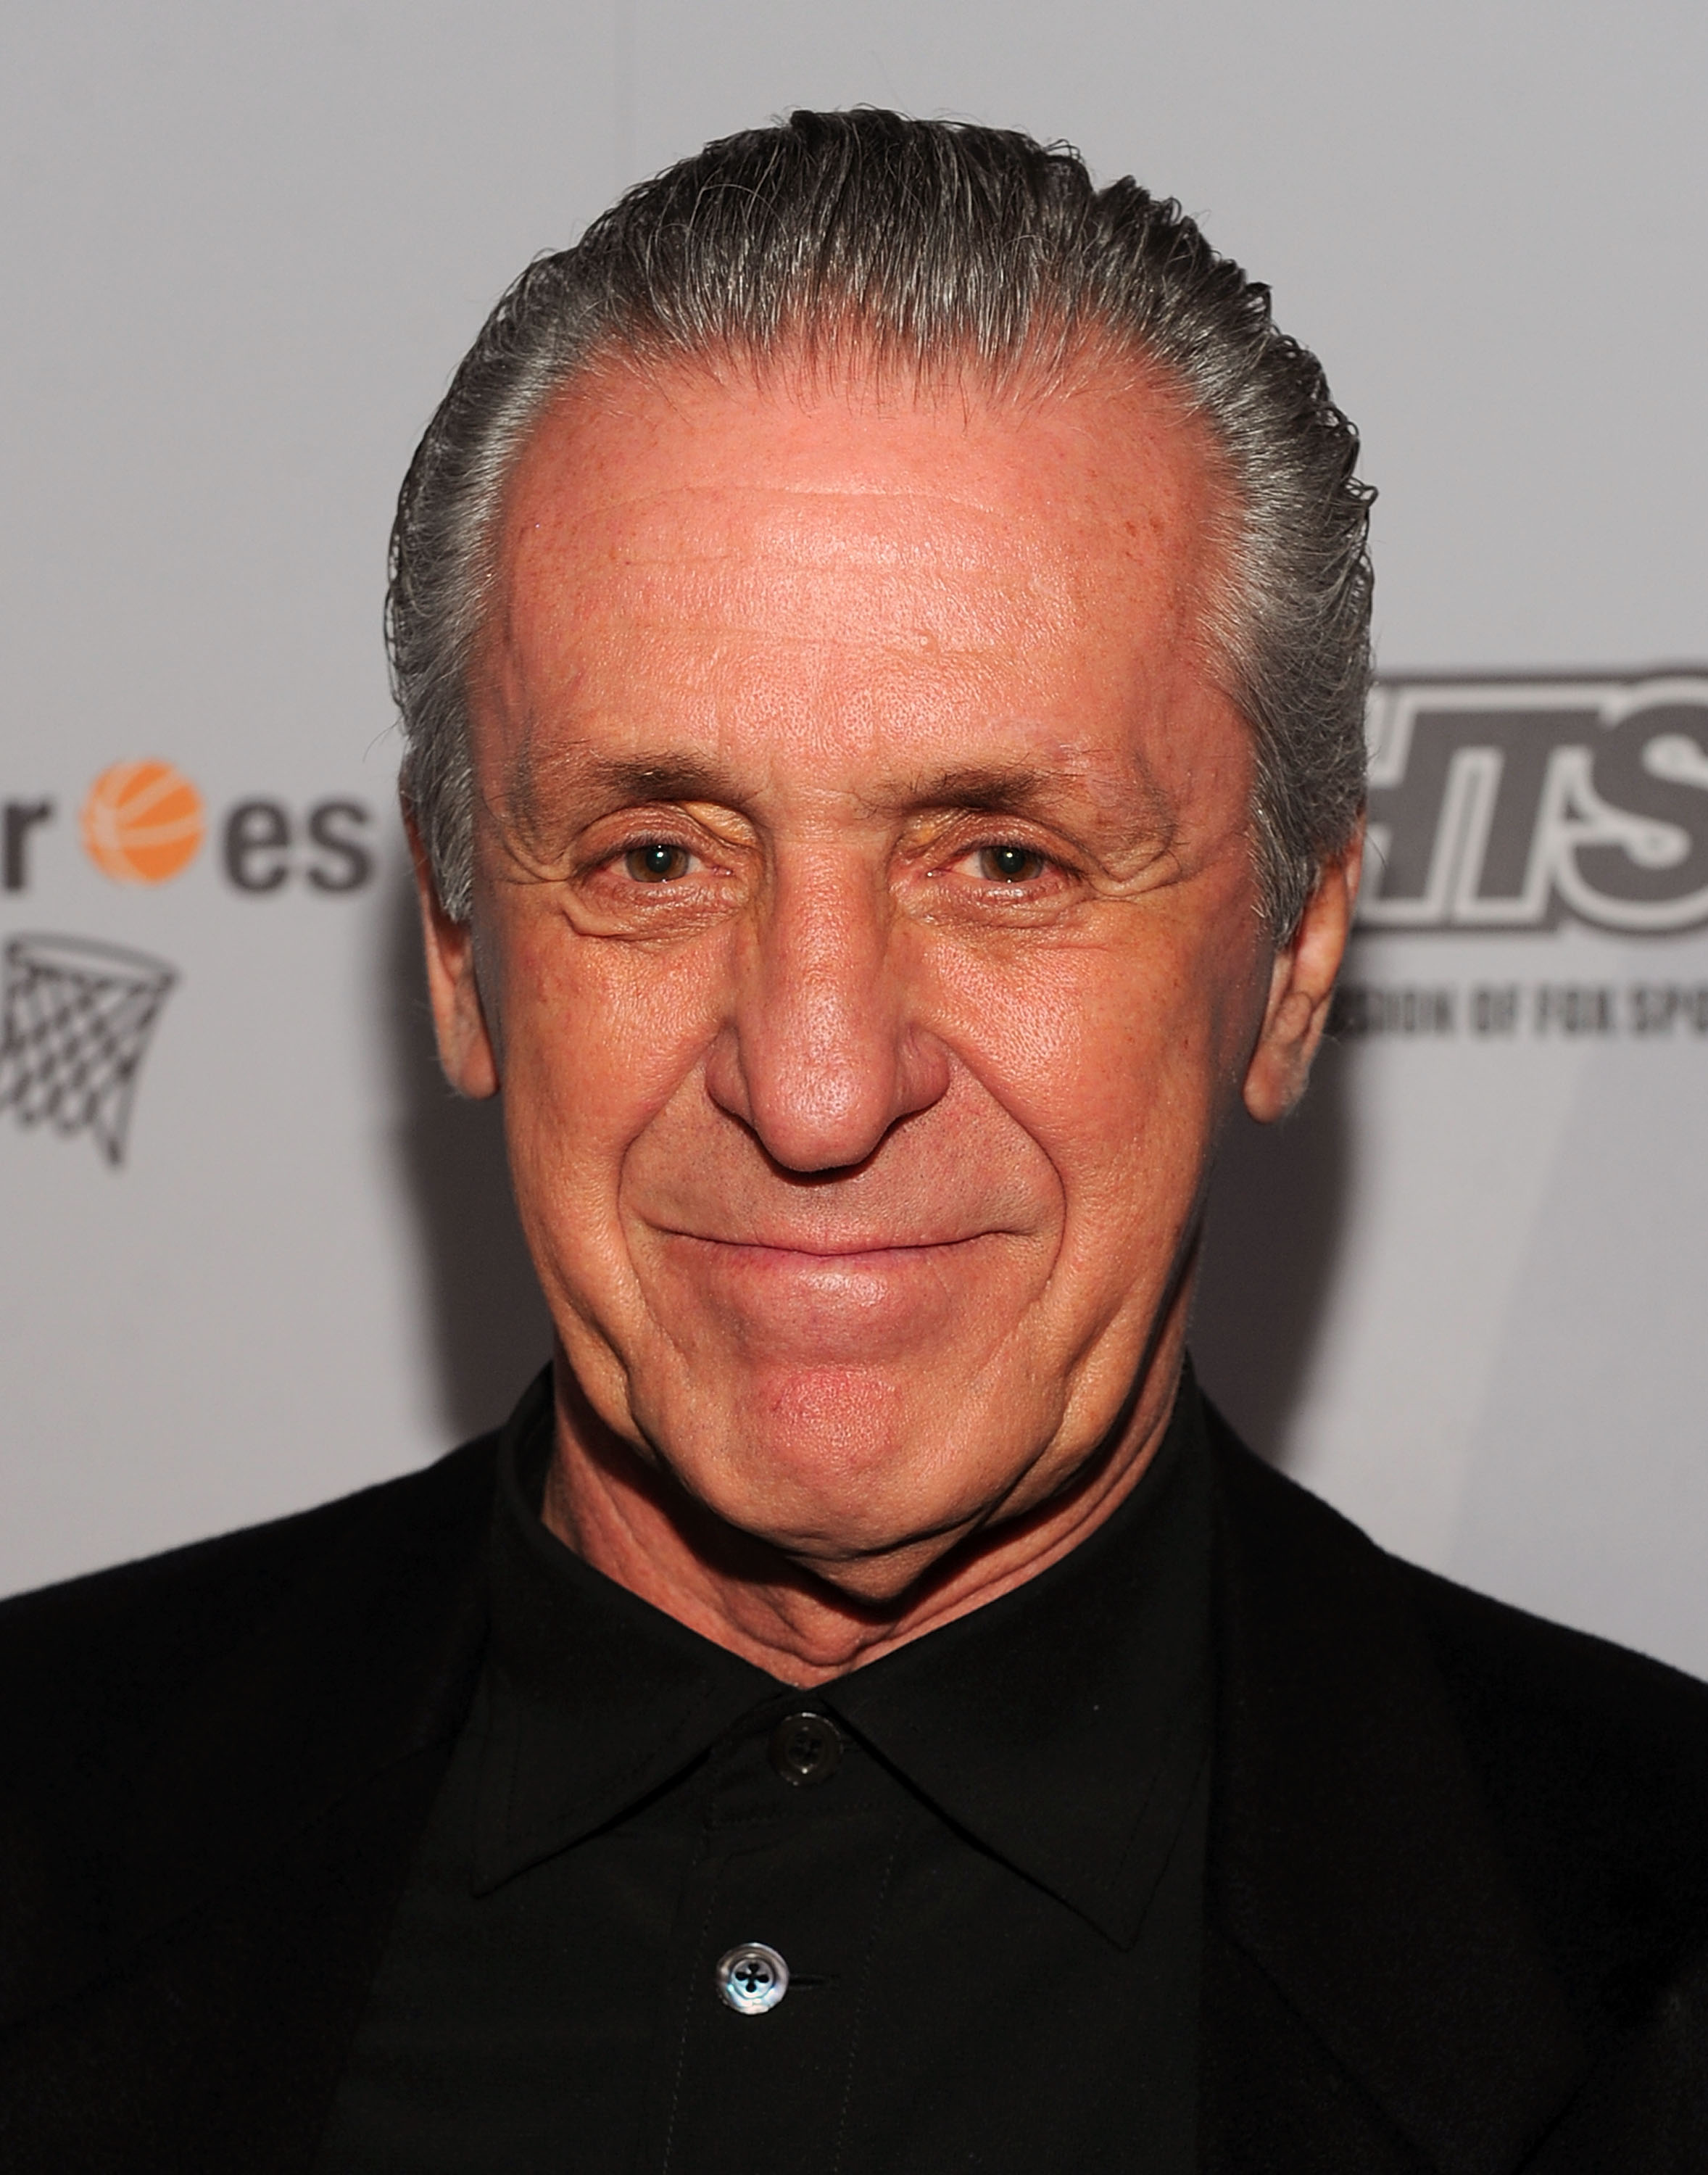 Miami Heat: Who can follow in Pat Riley's footsteps as president?